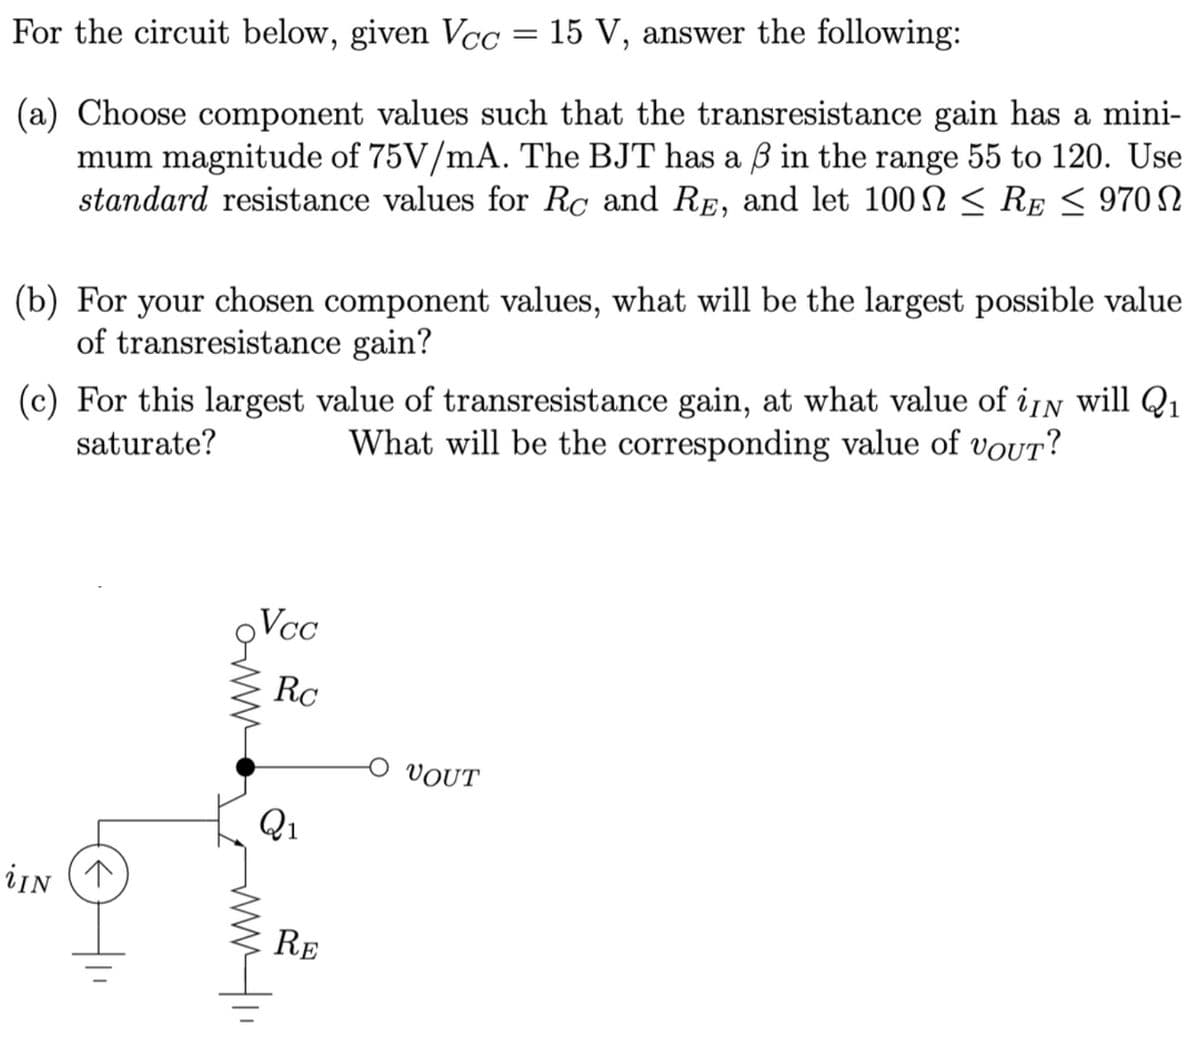 For the circuit below, given Vcc = 15 V, answer the following:
(a) Choose component values such that the transresistance gain has a mini-
mum magnitude of 75V/mA. The BJT has a ß in the range 55 to 120. Use
standard resistance values for Rc and RE, and let 100 ≤ RE≤ 970
(b) For your chosen component values, what will be the largest possible value
of transresistance gain?
(c) For this largest value of transresistance gain, at what value of iN will Q₁ 1
saturate?
What will be the corresponding value of voUT?
iIN
I
QVcc
Rc
aw
Q1
RE
VOUT